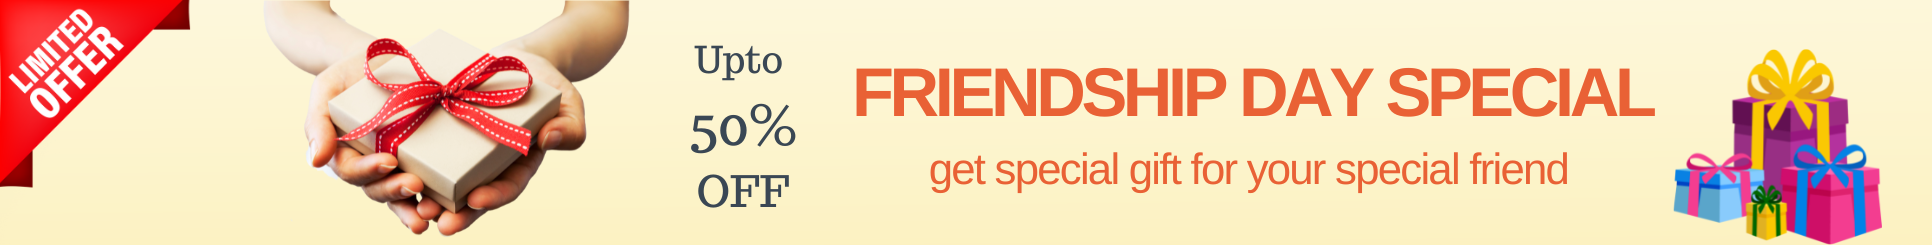 friendship Day gifts